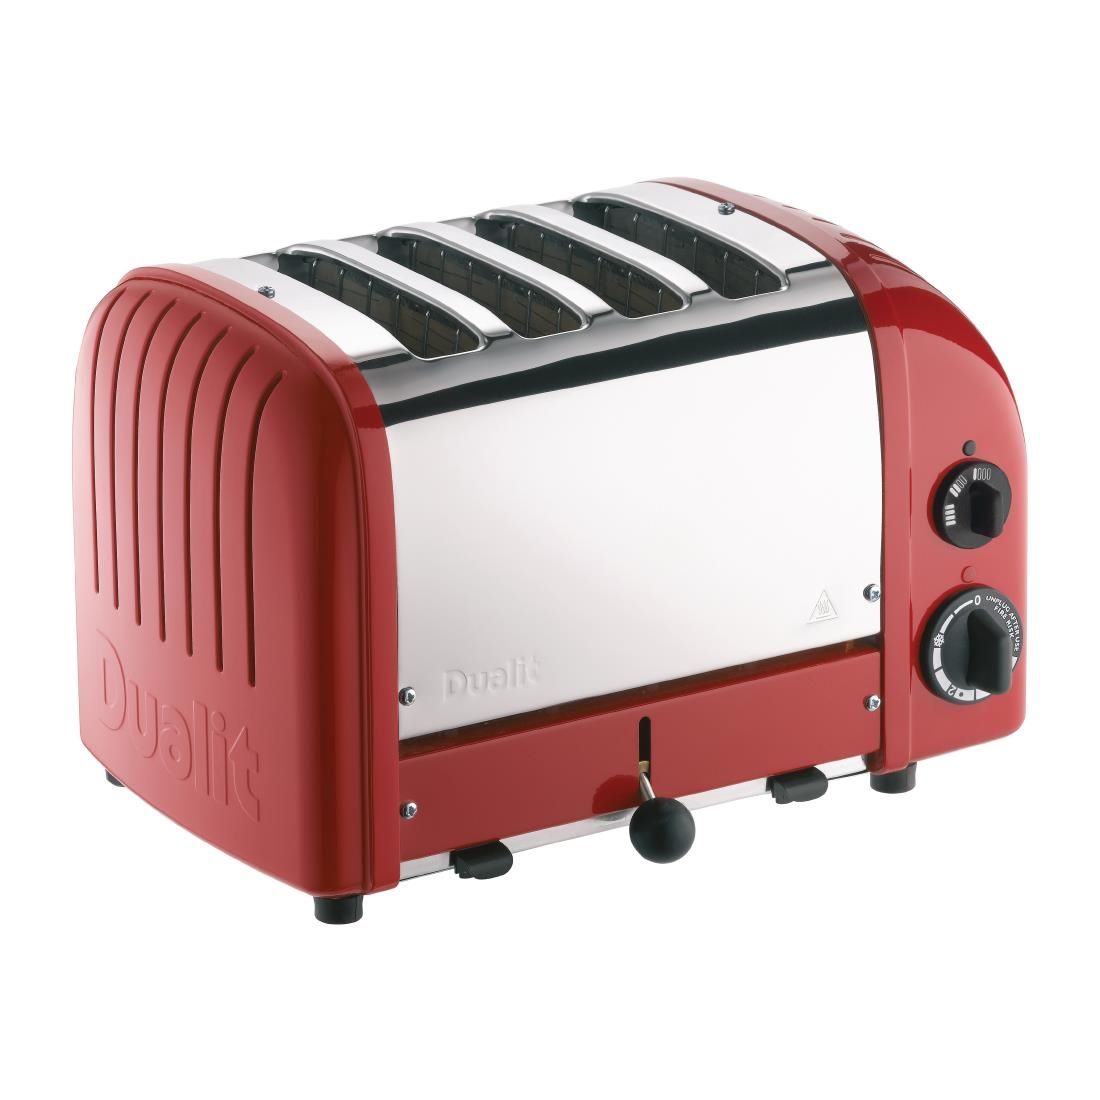 Dualit 2 x 2 Combi Vario 4 Slice Toaster Red 42175 JD Catering Equipment Solutions Ltd